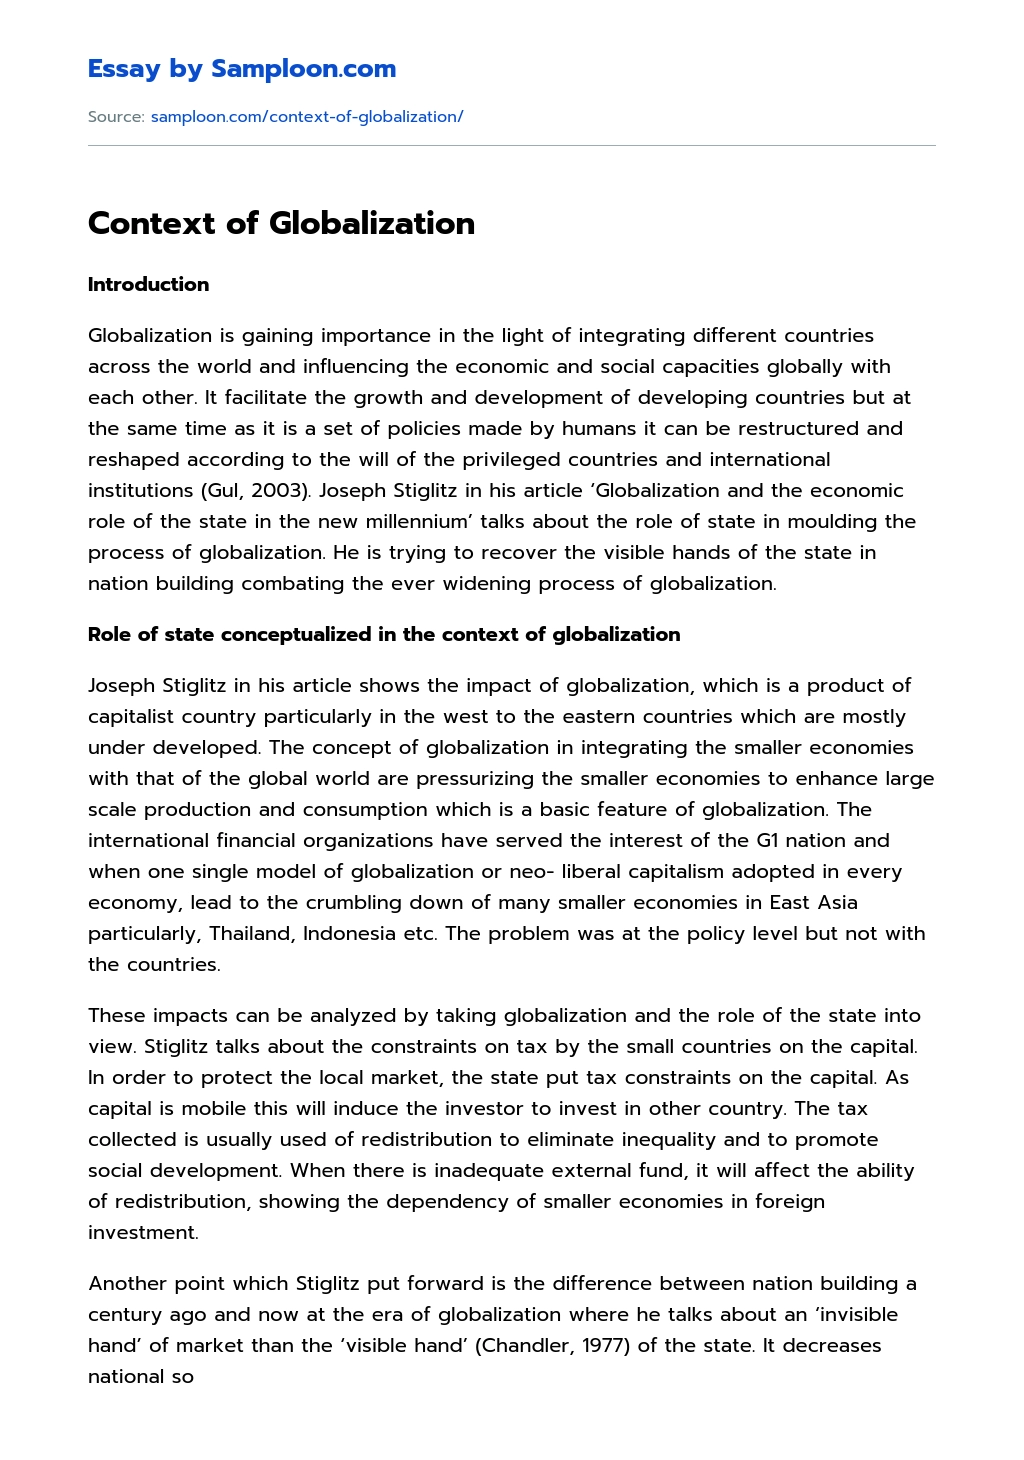 Context of Globalization essay